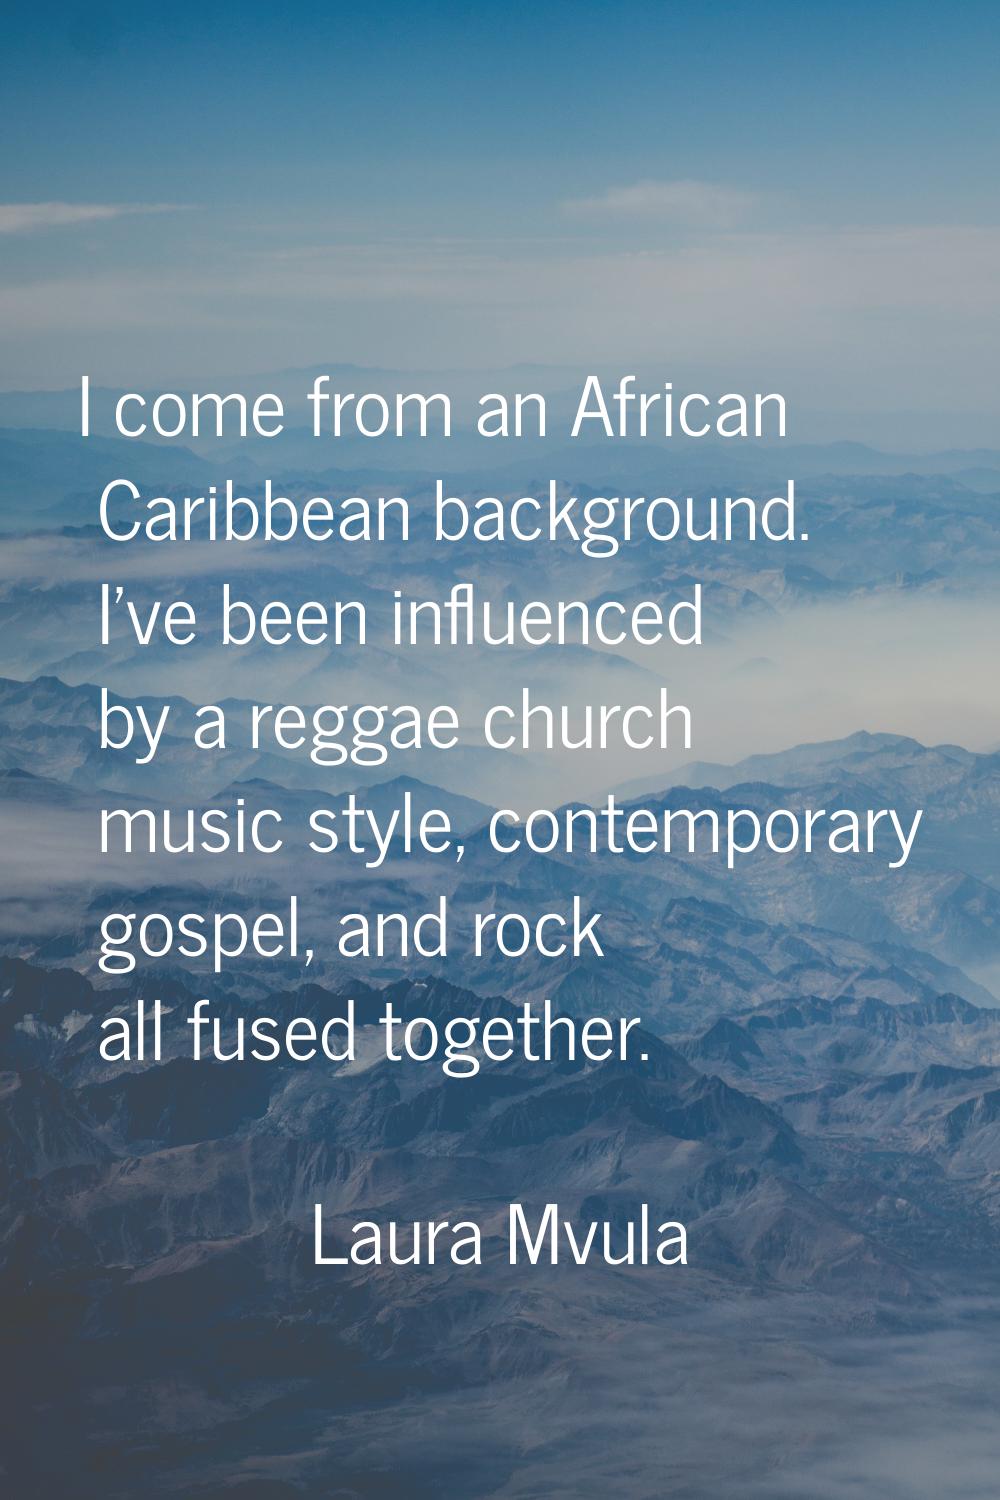 I come from an African Caribbean background. I've been influenced by a reggae church music style, c